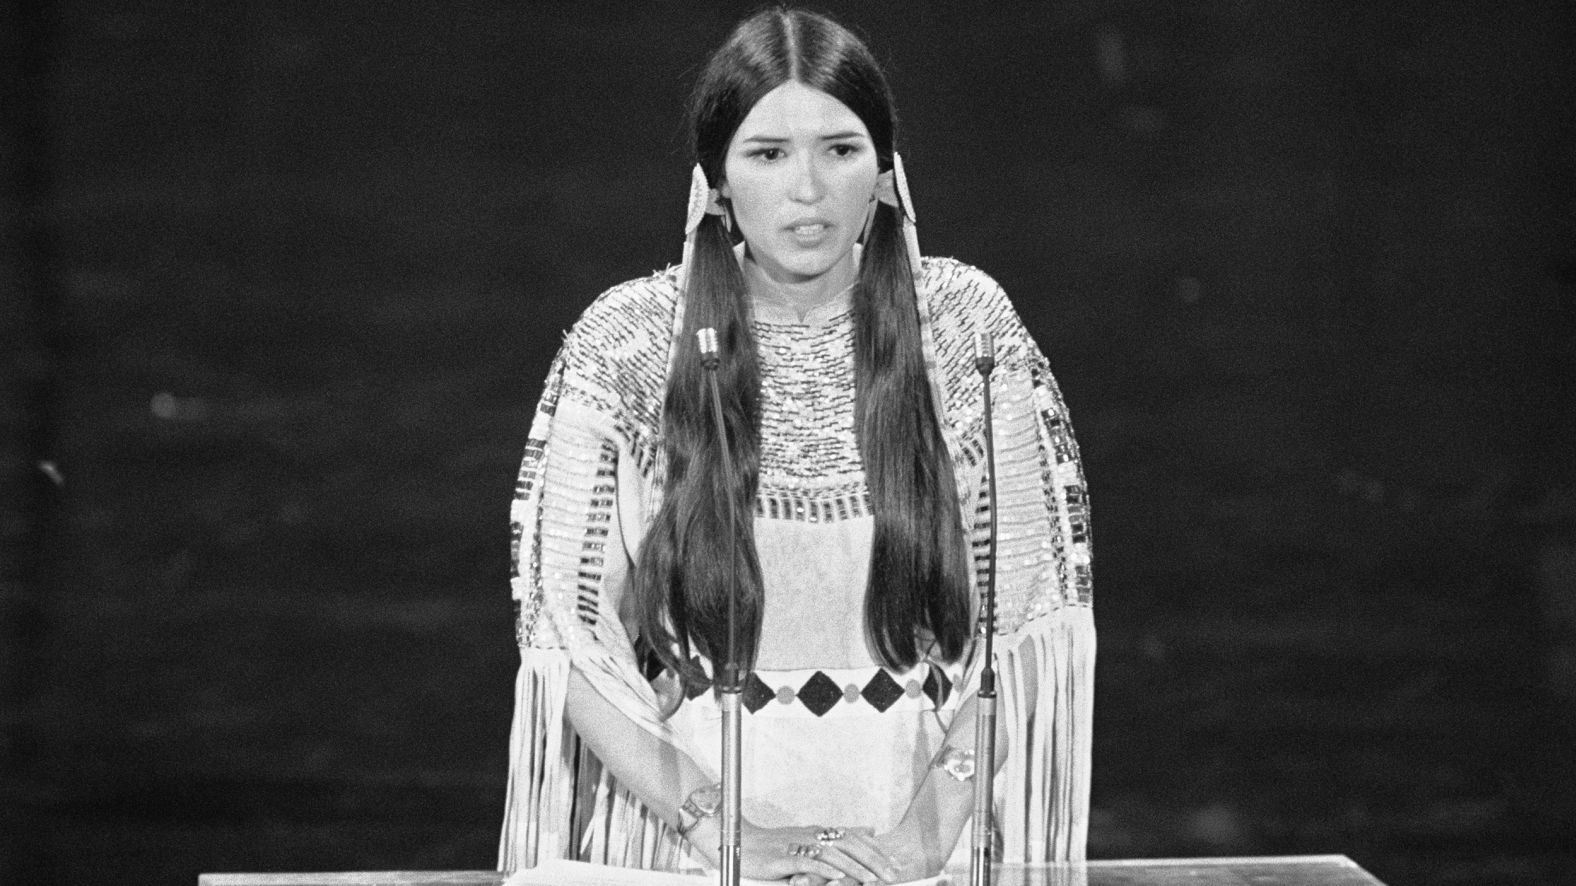 <a href="index.php?page=&url=https%3A%2F%2Fwww.cnn.com%2F2022%2F10%2F03%2Fentertainment%2Fsacheen-littlefeather-dead-marlon-brando-intl-scli%2Findex.html" target="_blank">Sacheen Littlefeather,</a> the Native American actress and activist who made history when she declined the best actor Oscar on behalf of Marlon Brando, died at the age of 75, the Academy of Motion Picture Arts and Sciences announced on October 3.